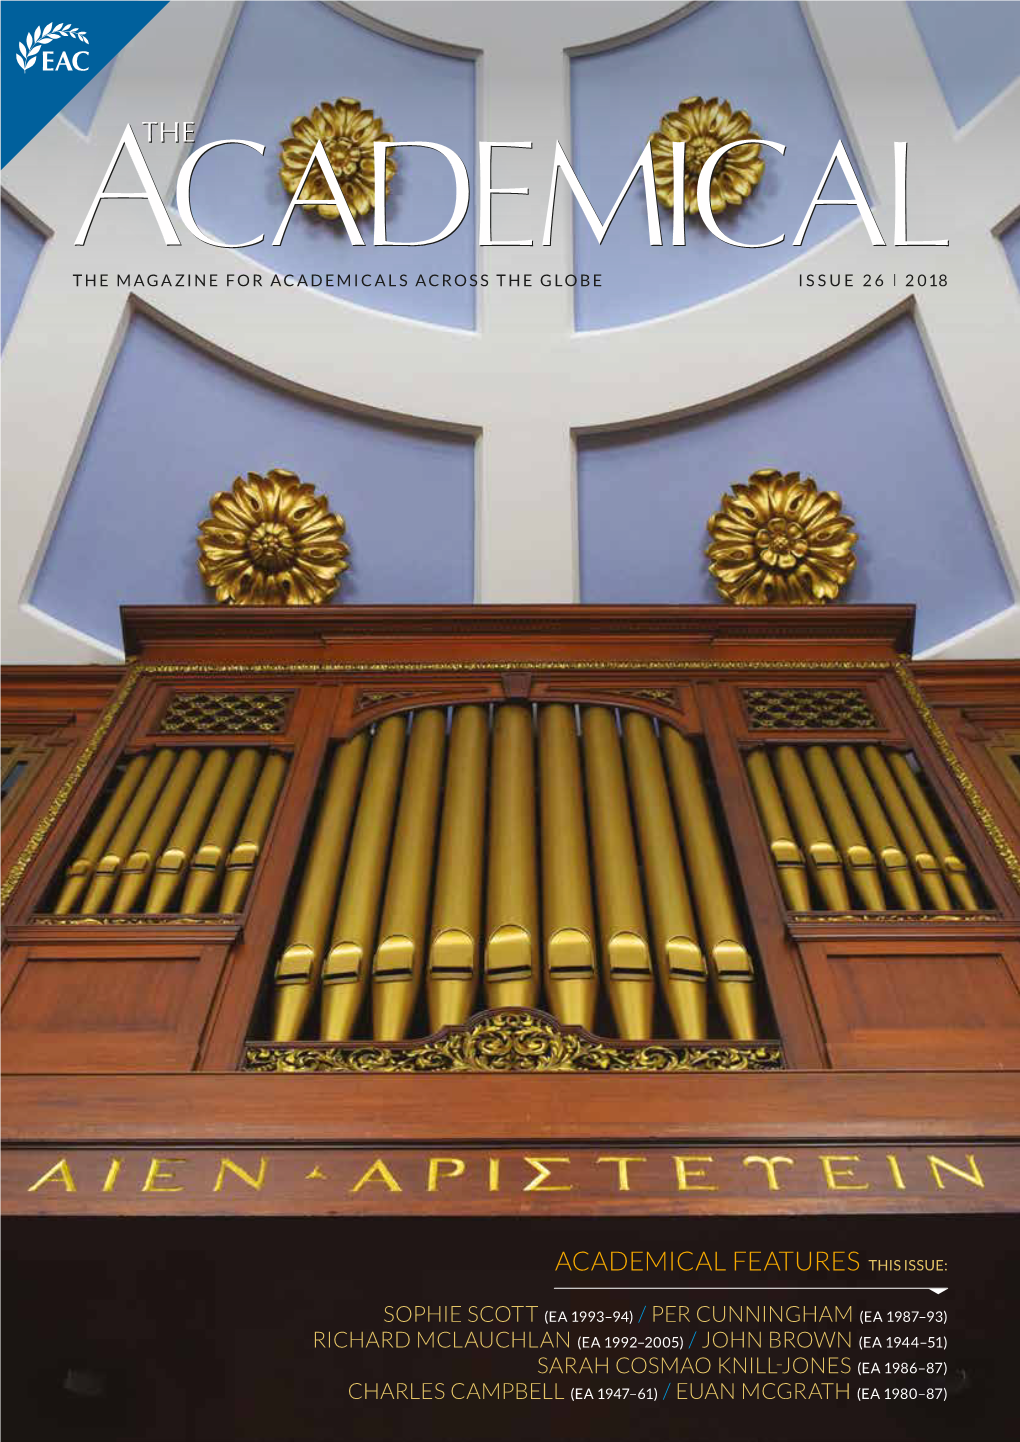 Academical Features This Issue